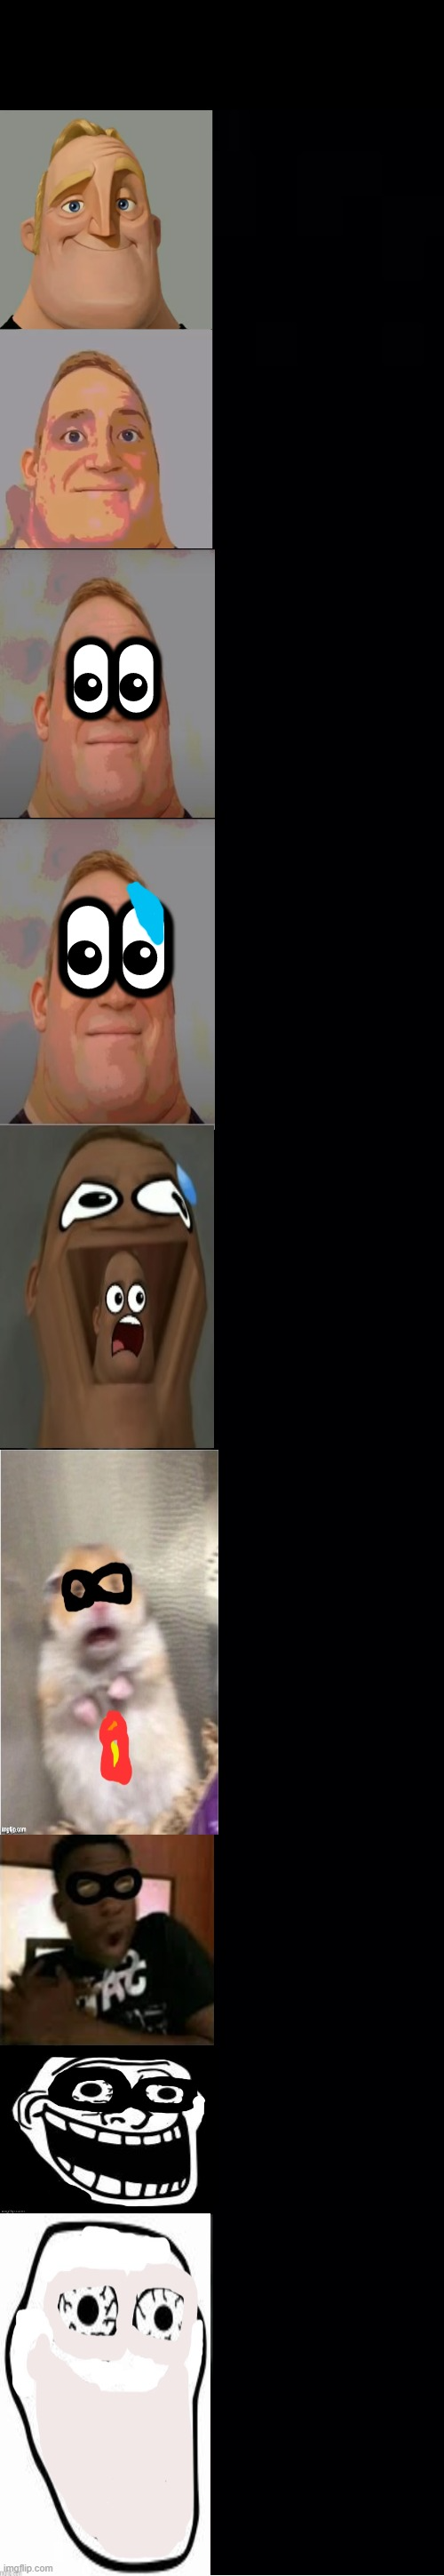 mr incredible becoming scared Blank Meme Template